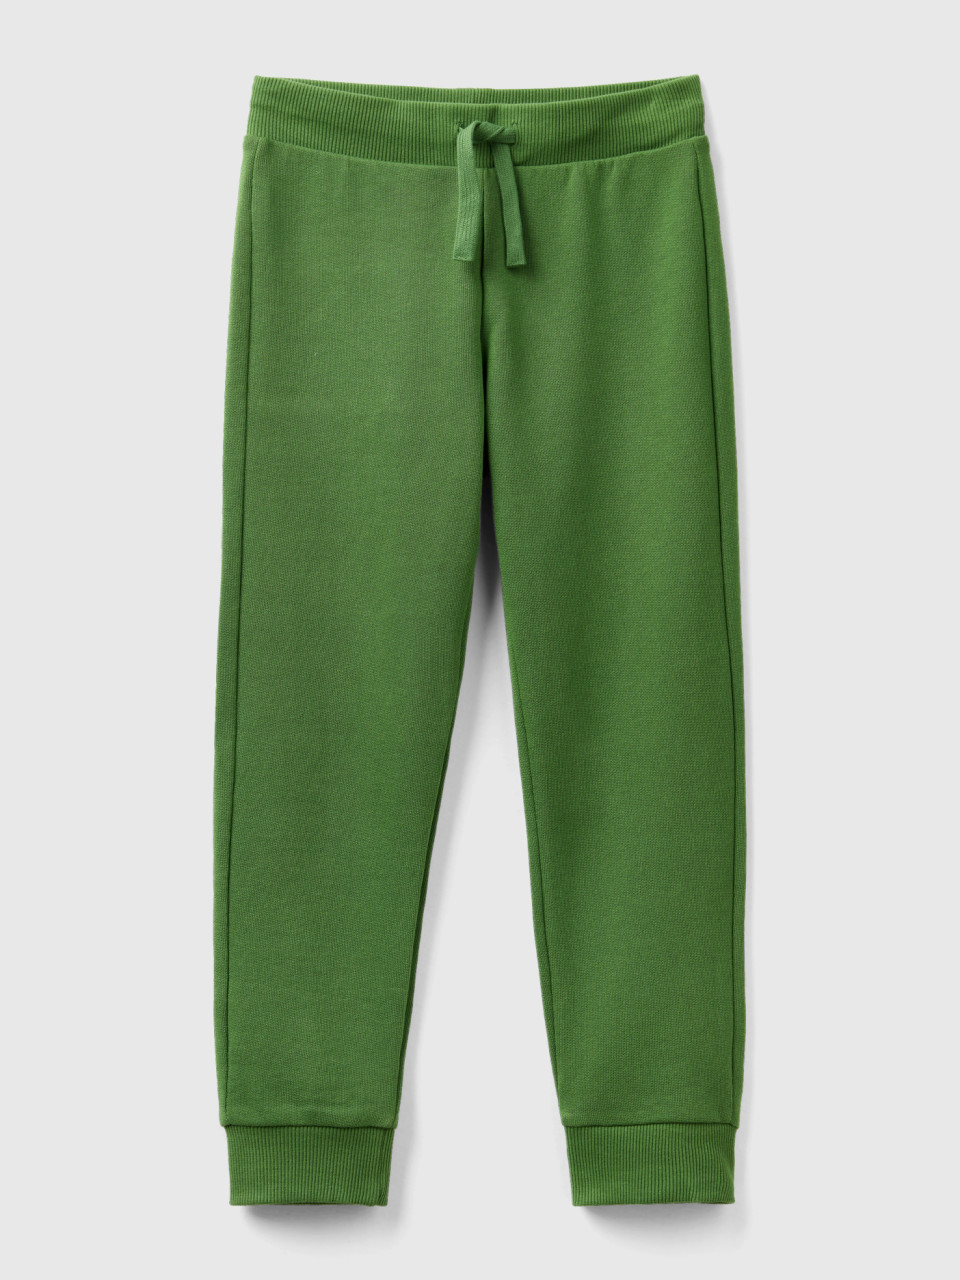 Benetton, Sporty Trousers With Drawstring, Military Green, Kids